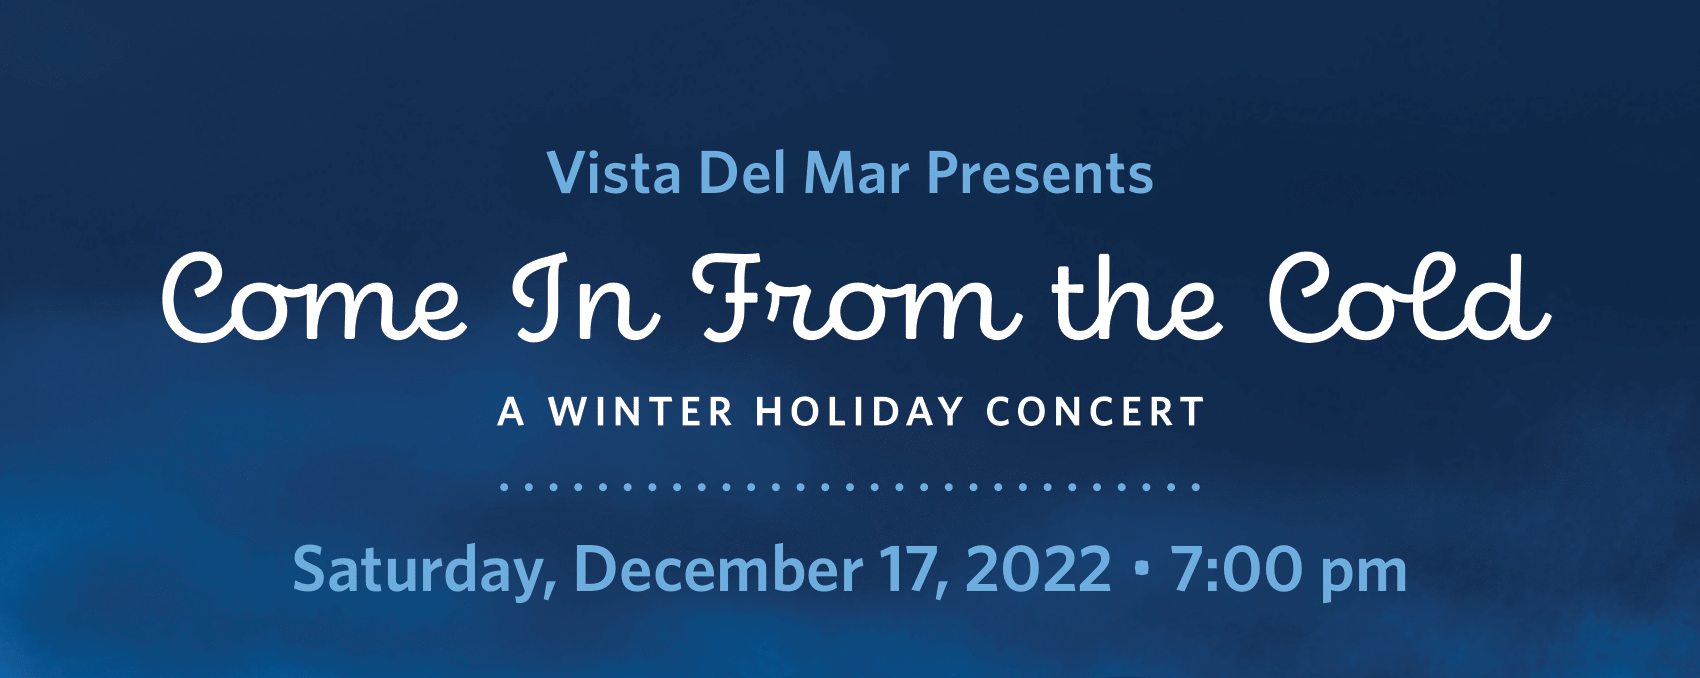 Vista Del Mar Presents Come In From the Cold - A Winter Holiday Concert • Saturday, December 17, 2022 • 7:00 pm